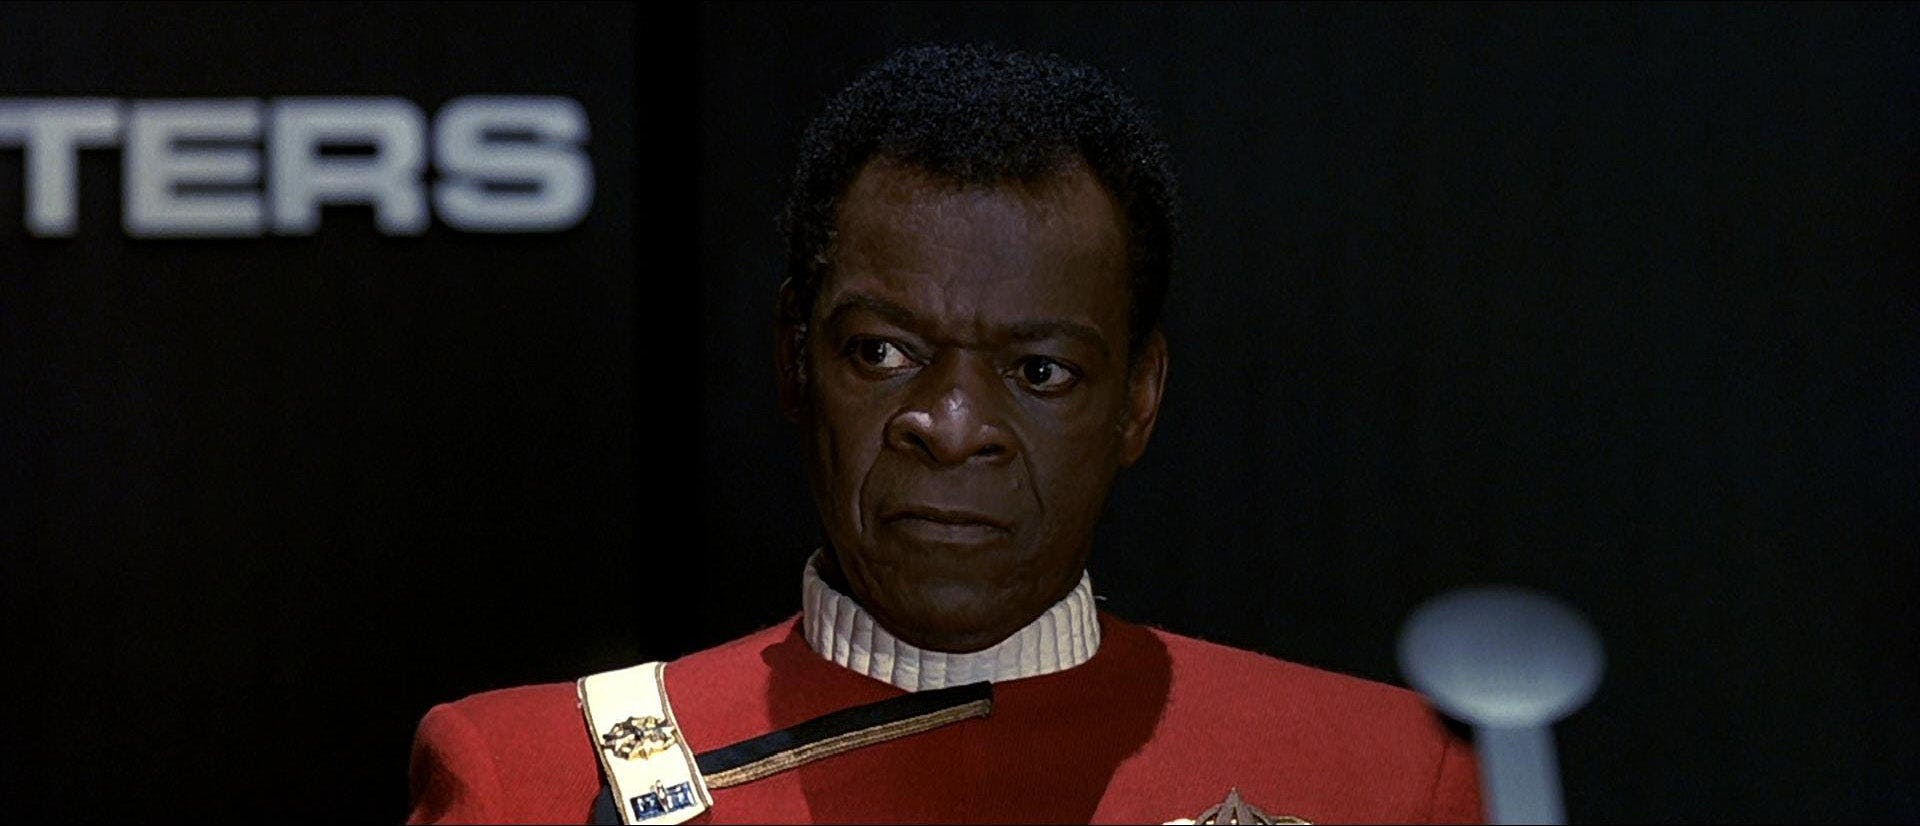 Cartwright sternly looks to his right in Star Trek VI: The Undiscovered Country